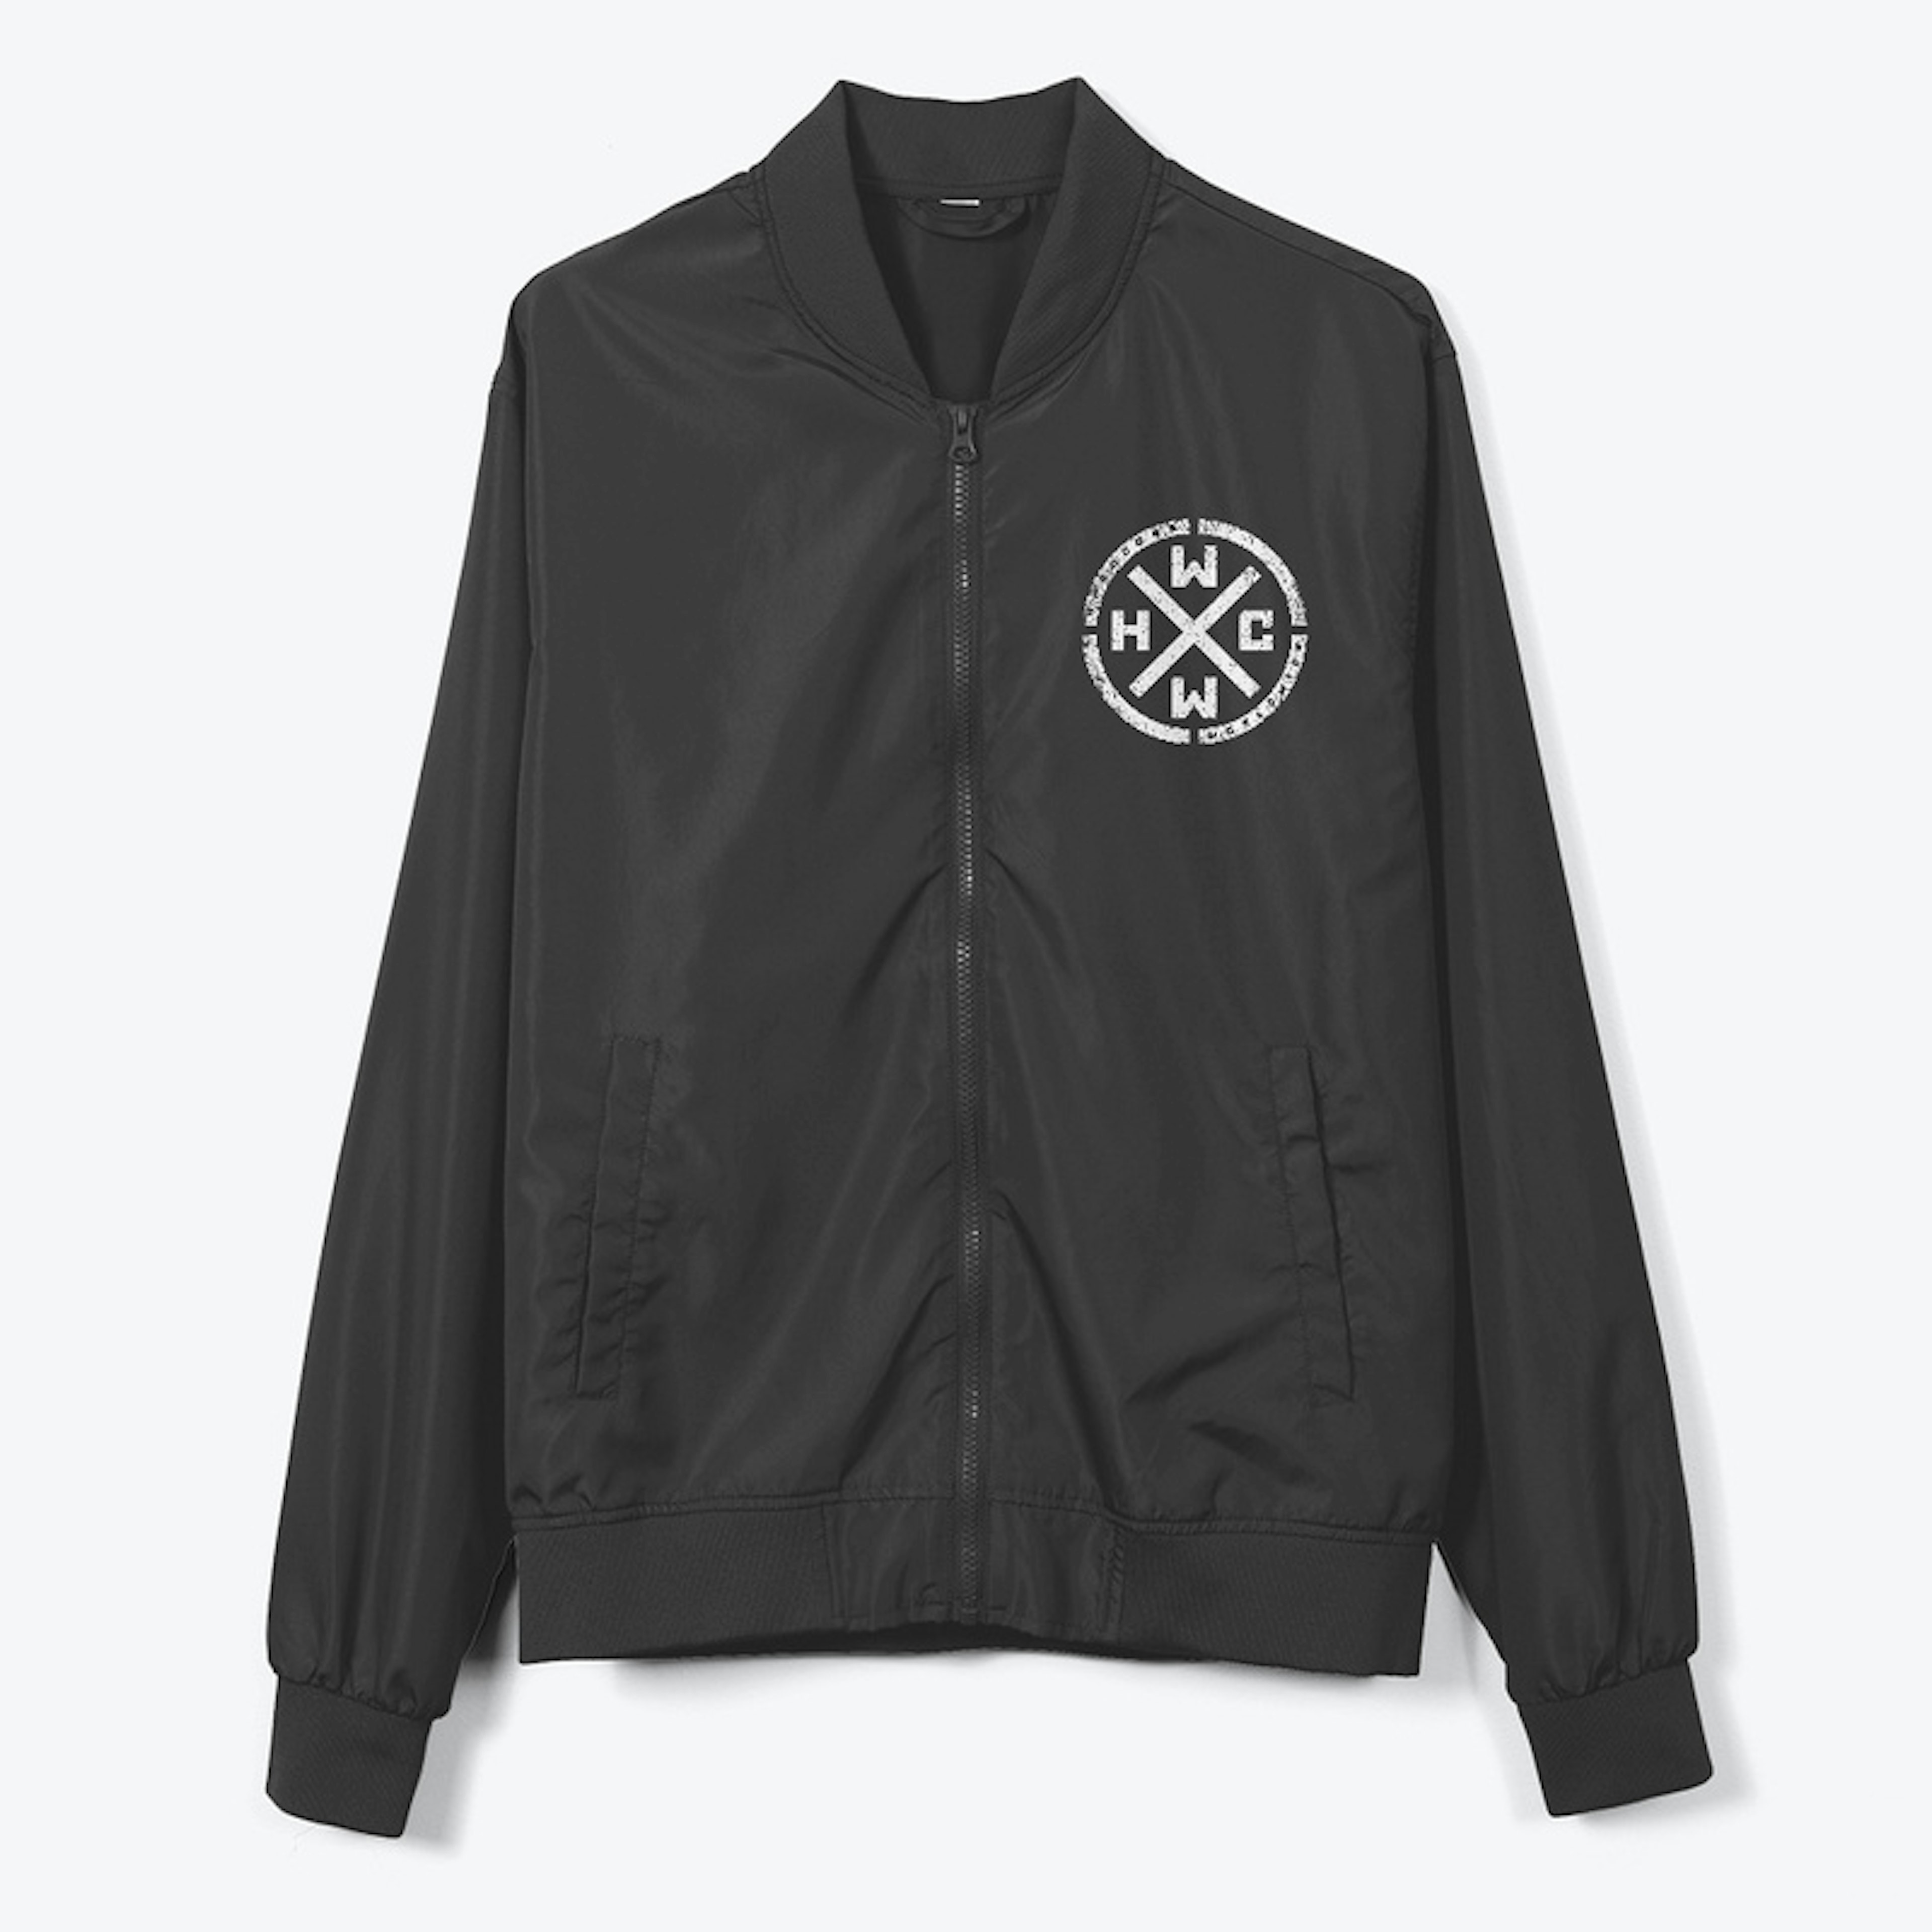 HCWW Official Bomber Jacket